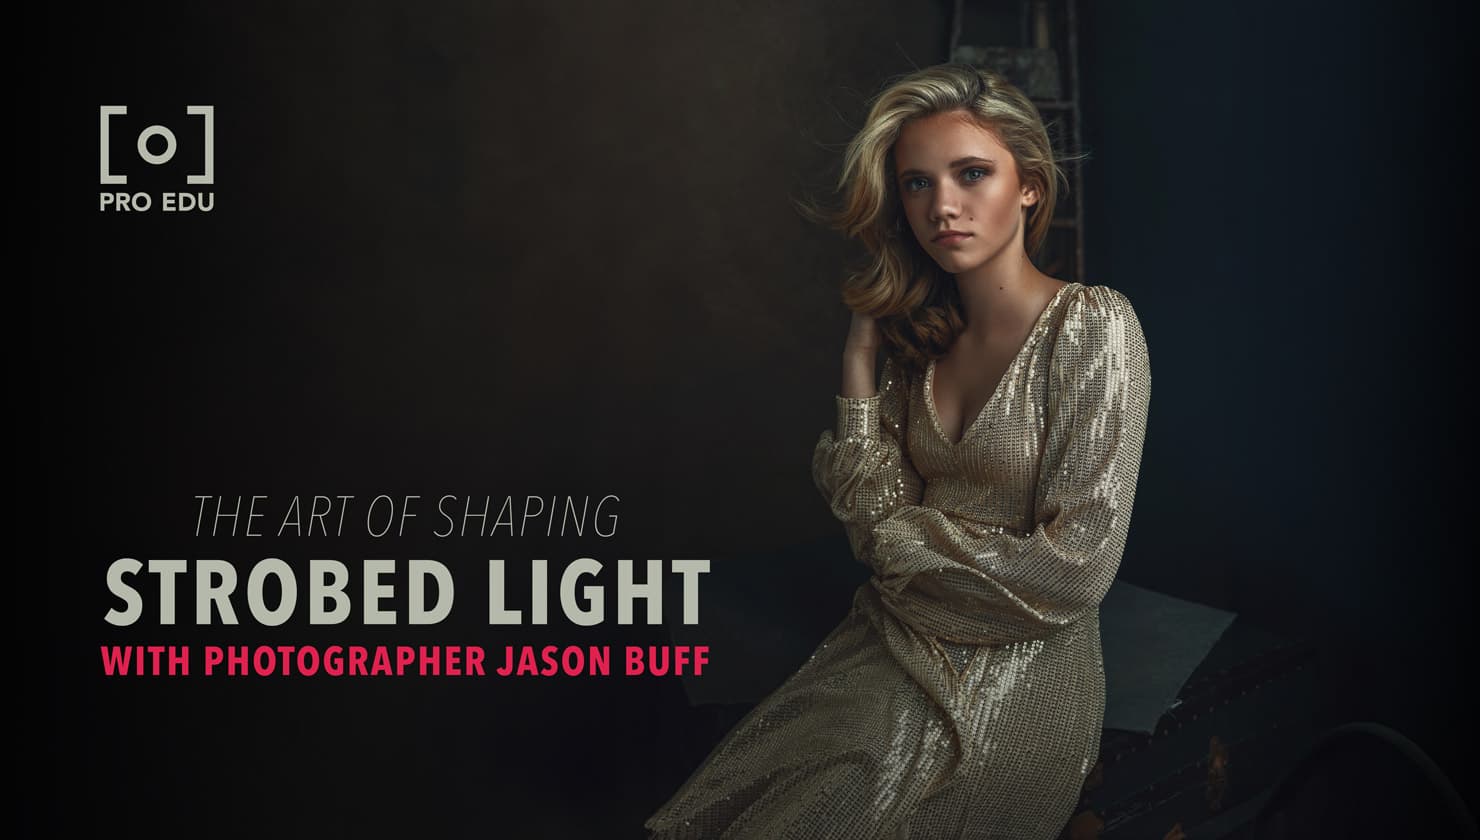 Master the Art of Shaping Strobed Light with Jason Buff and PRO EDU